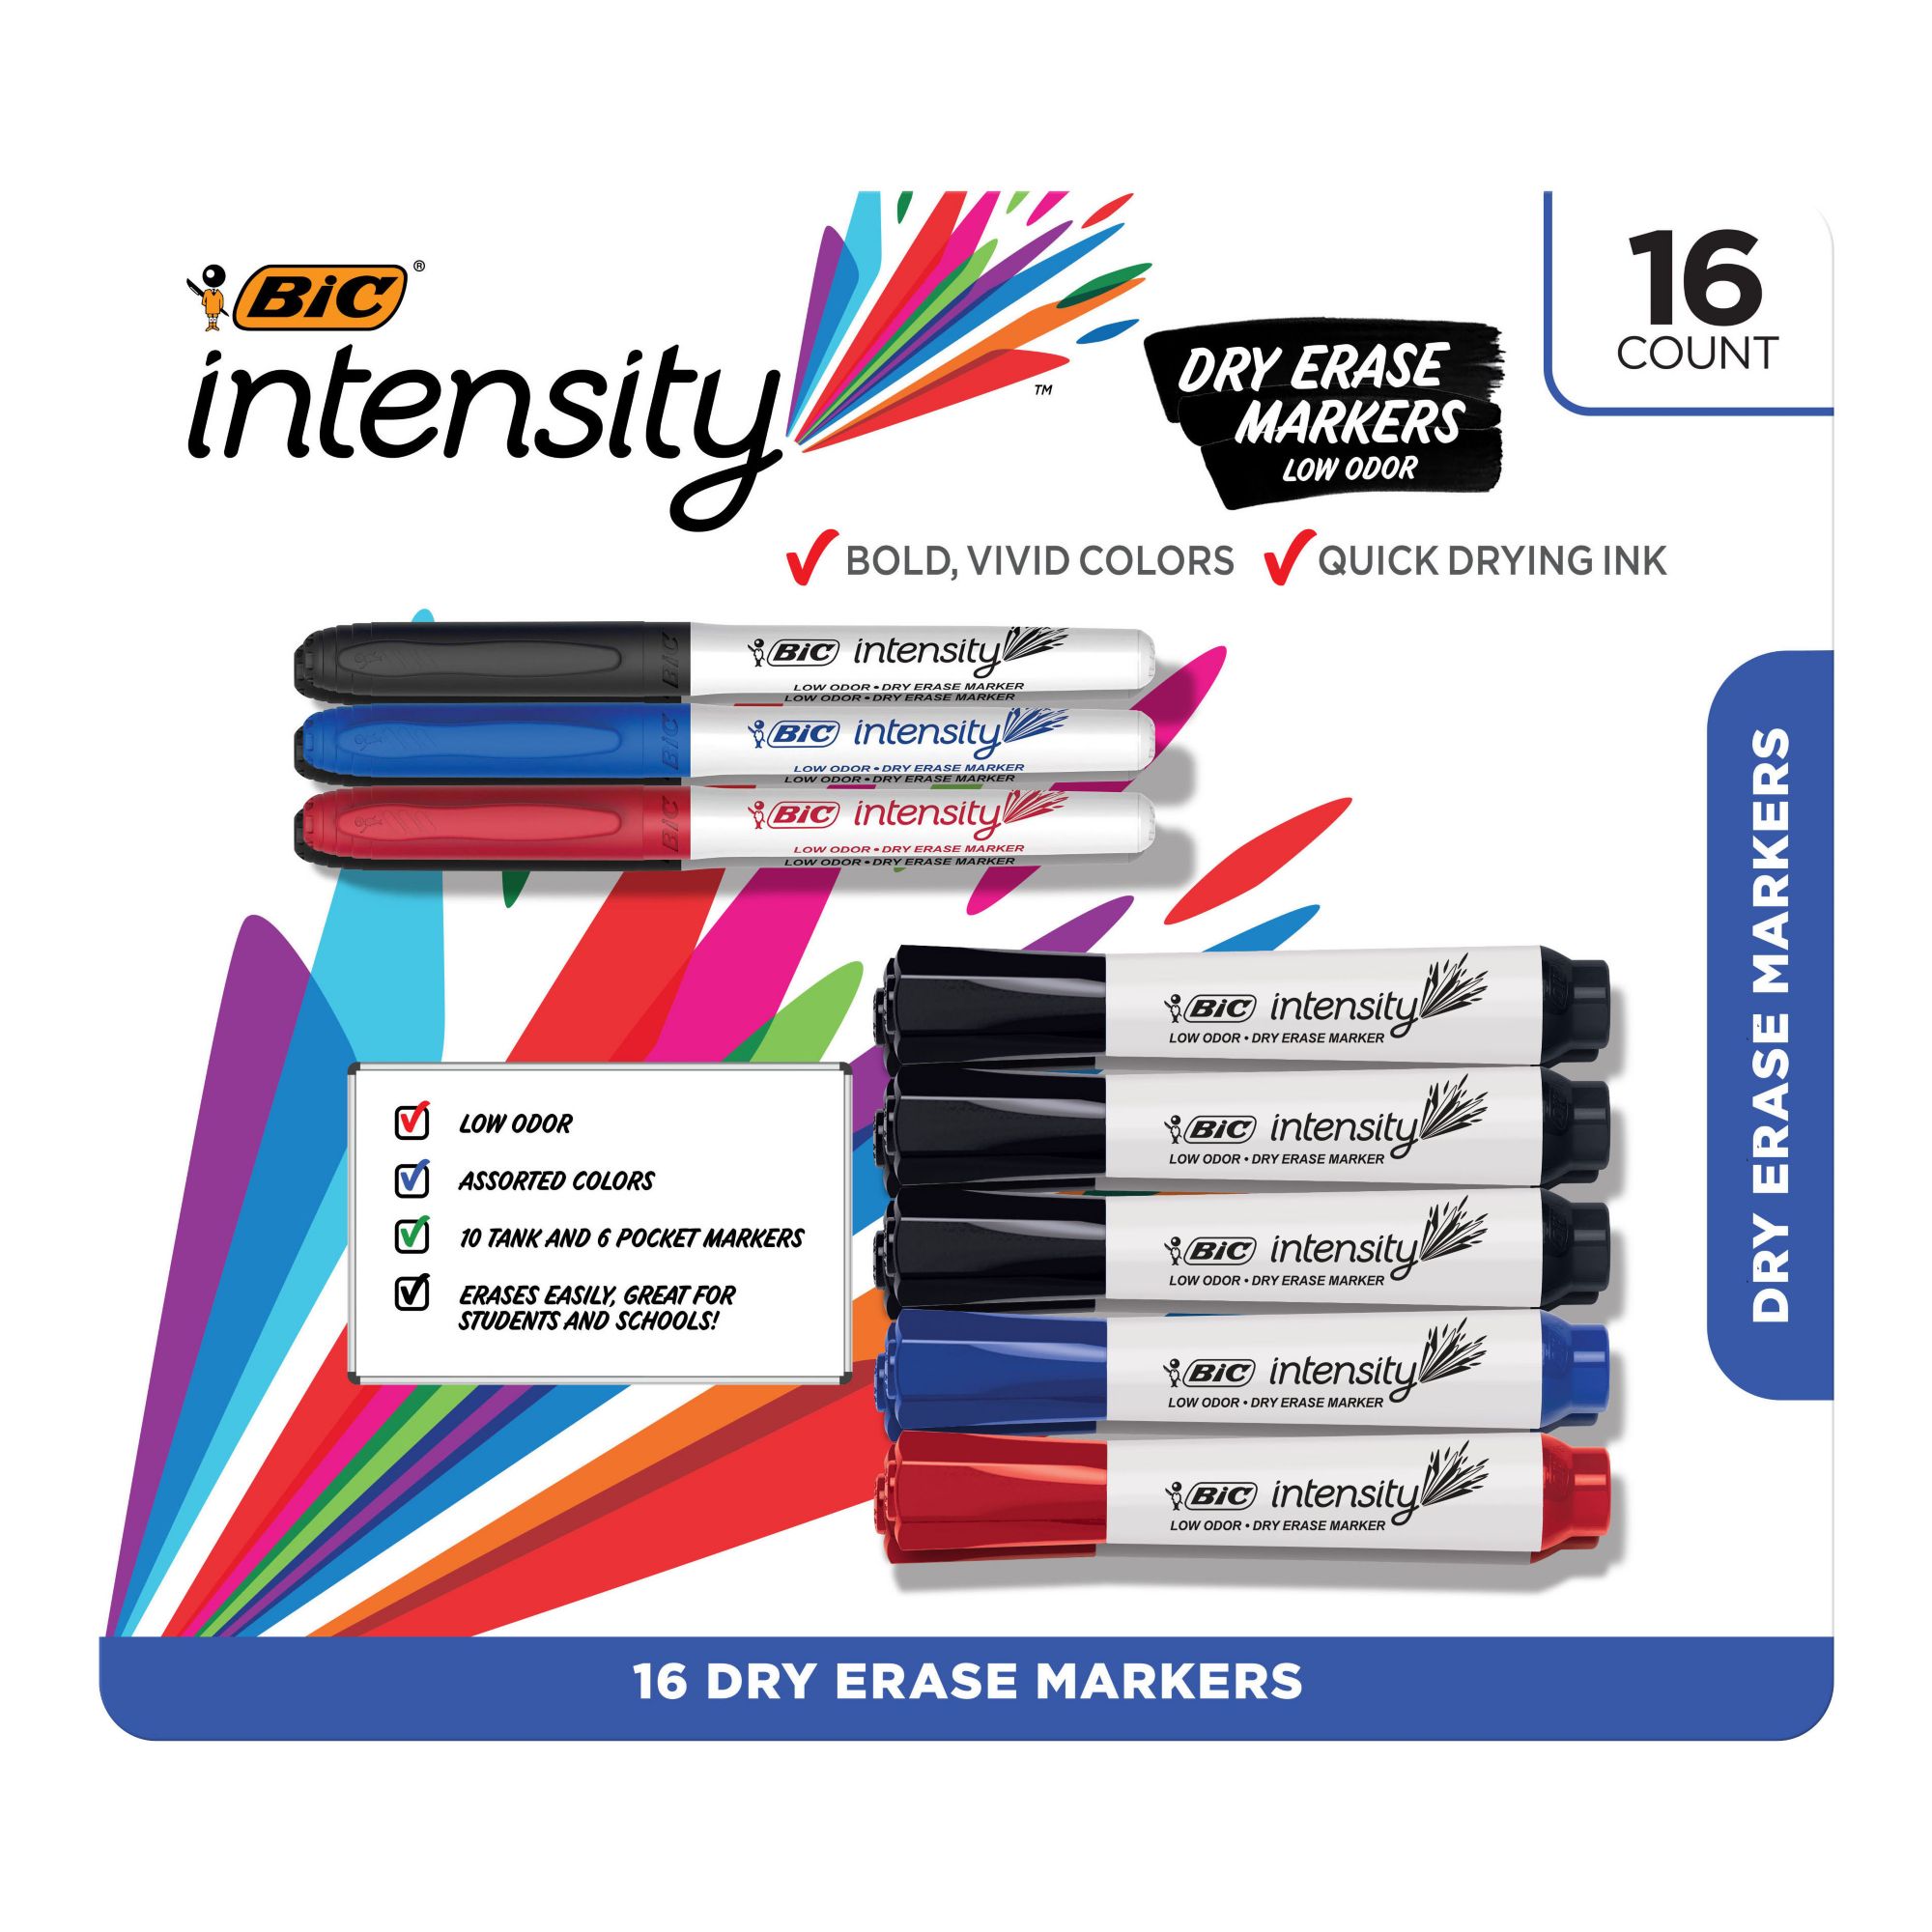 BIC Intensity Tank and Pocket Dry Erase Markers With Low-Odor Ink, 16 ct. - Black, Blue and Red